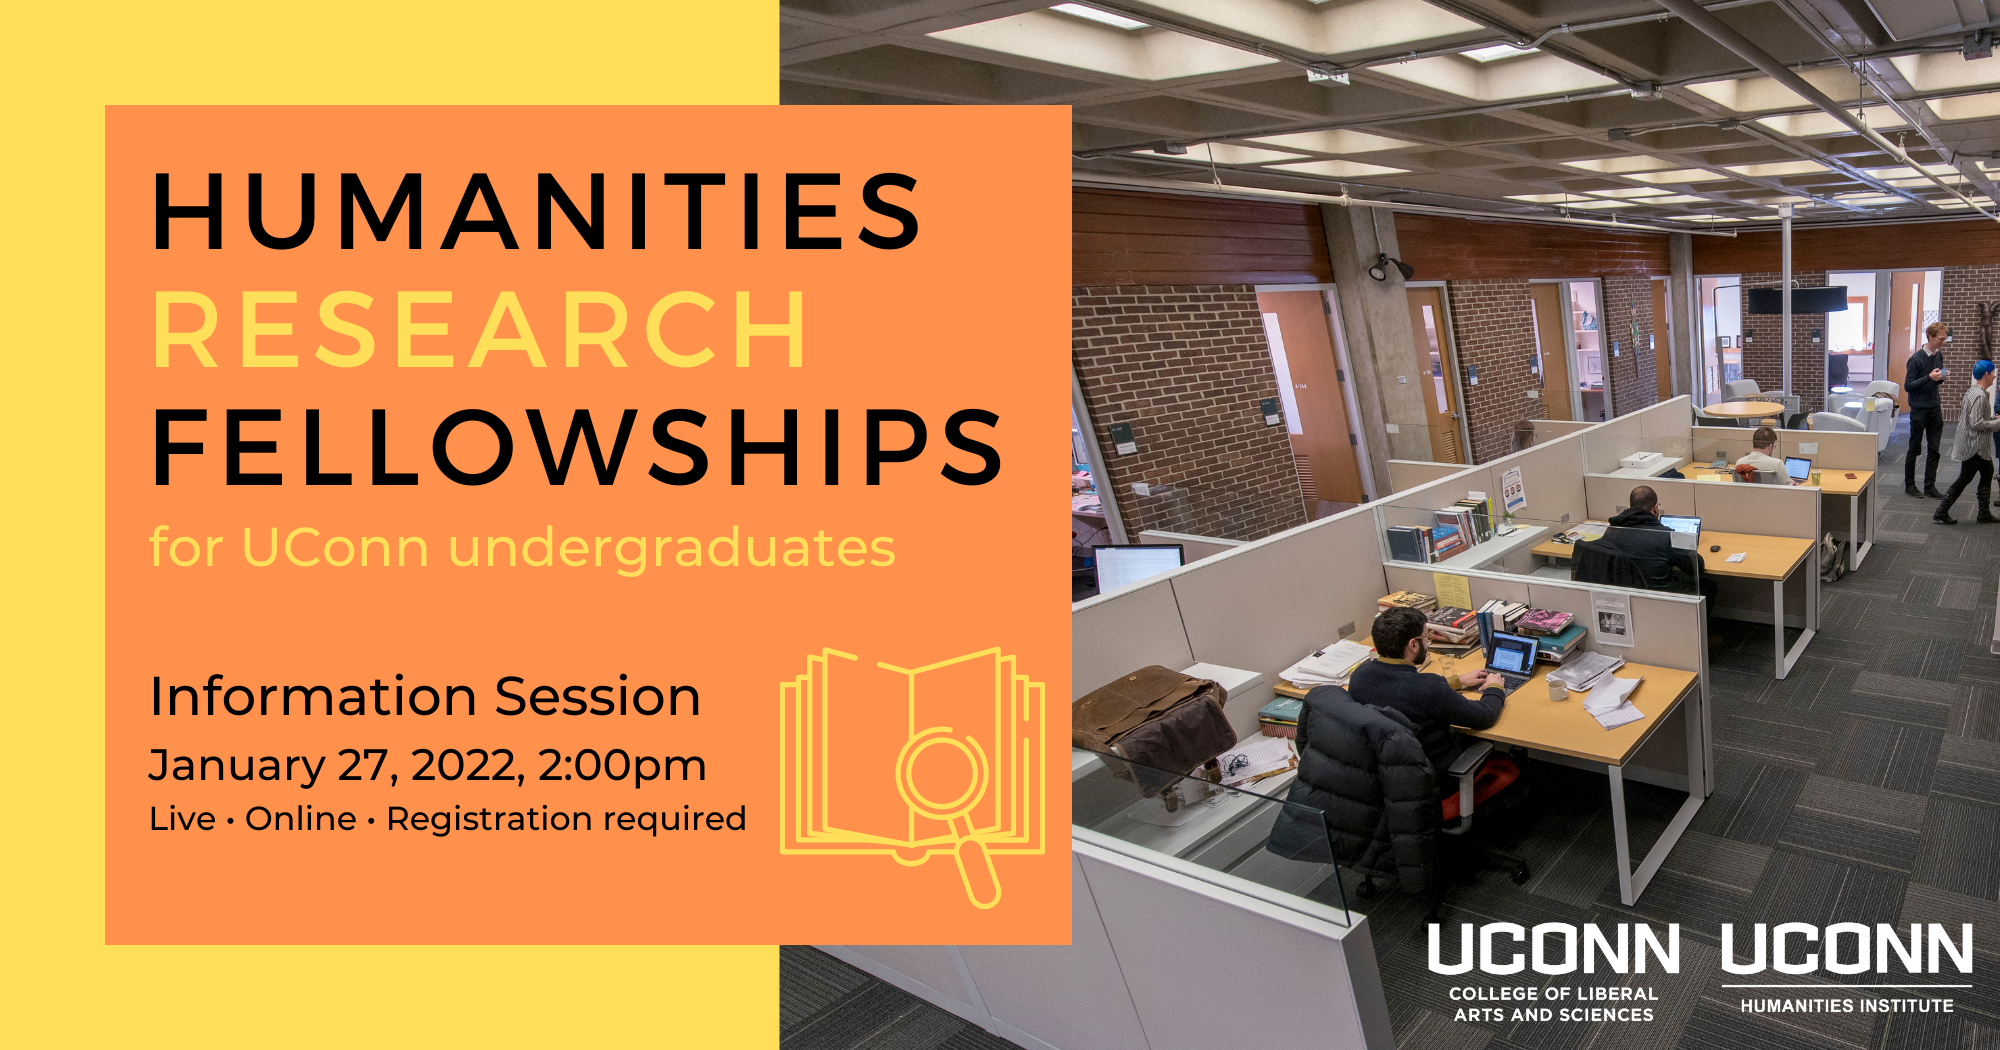 Humanities research fellowships for UConn undergraduates. Information Session. January 27, 2022, 2:00pm. Live. Online. Registration required.